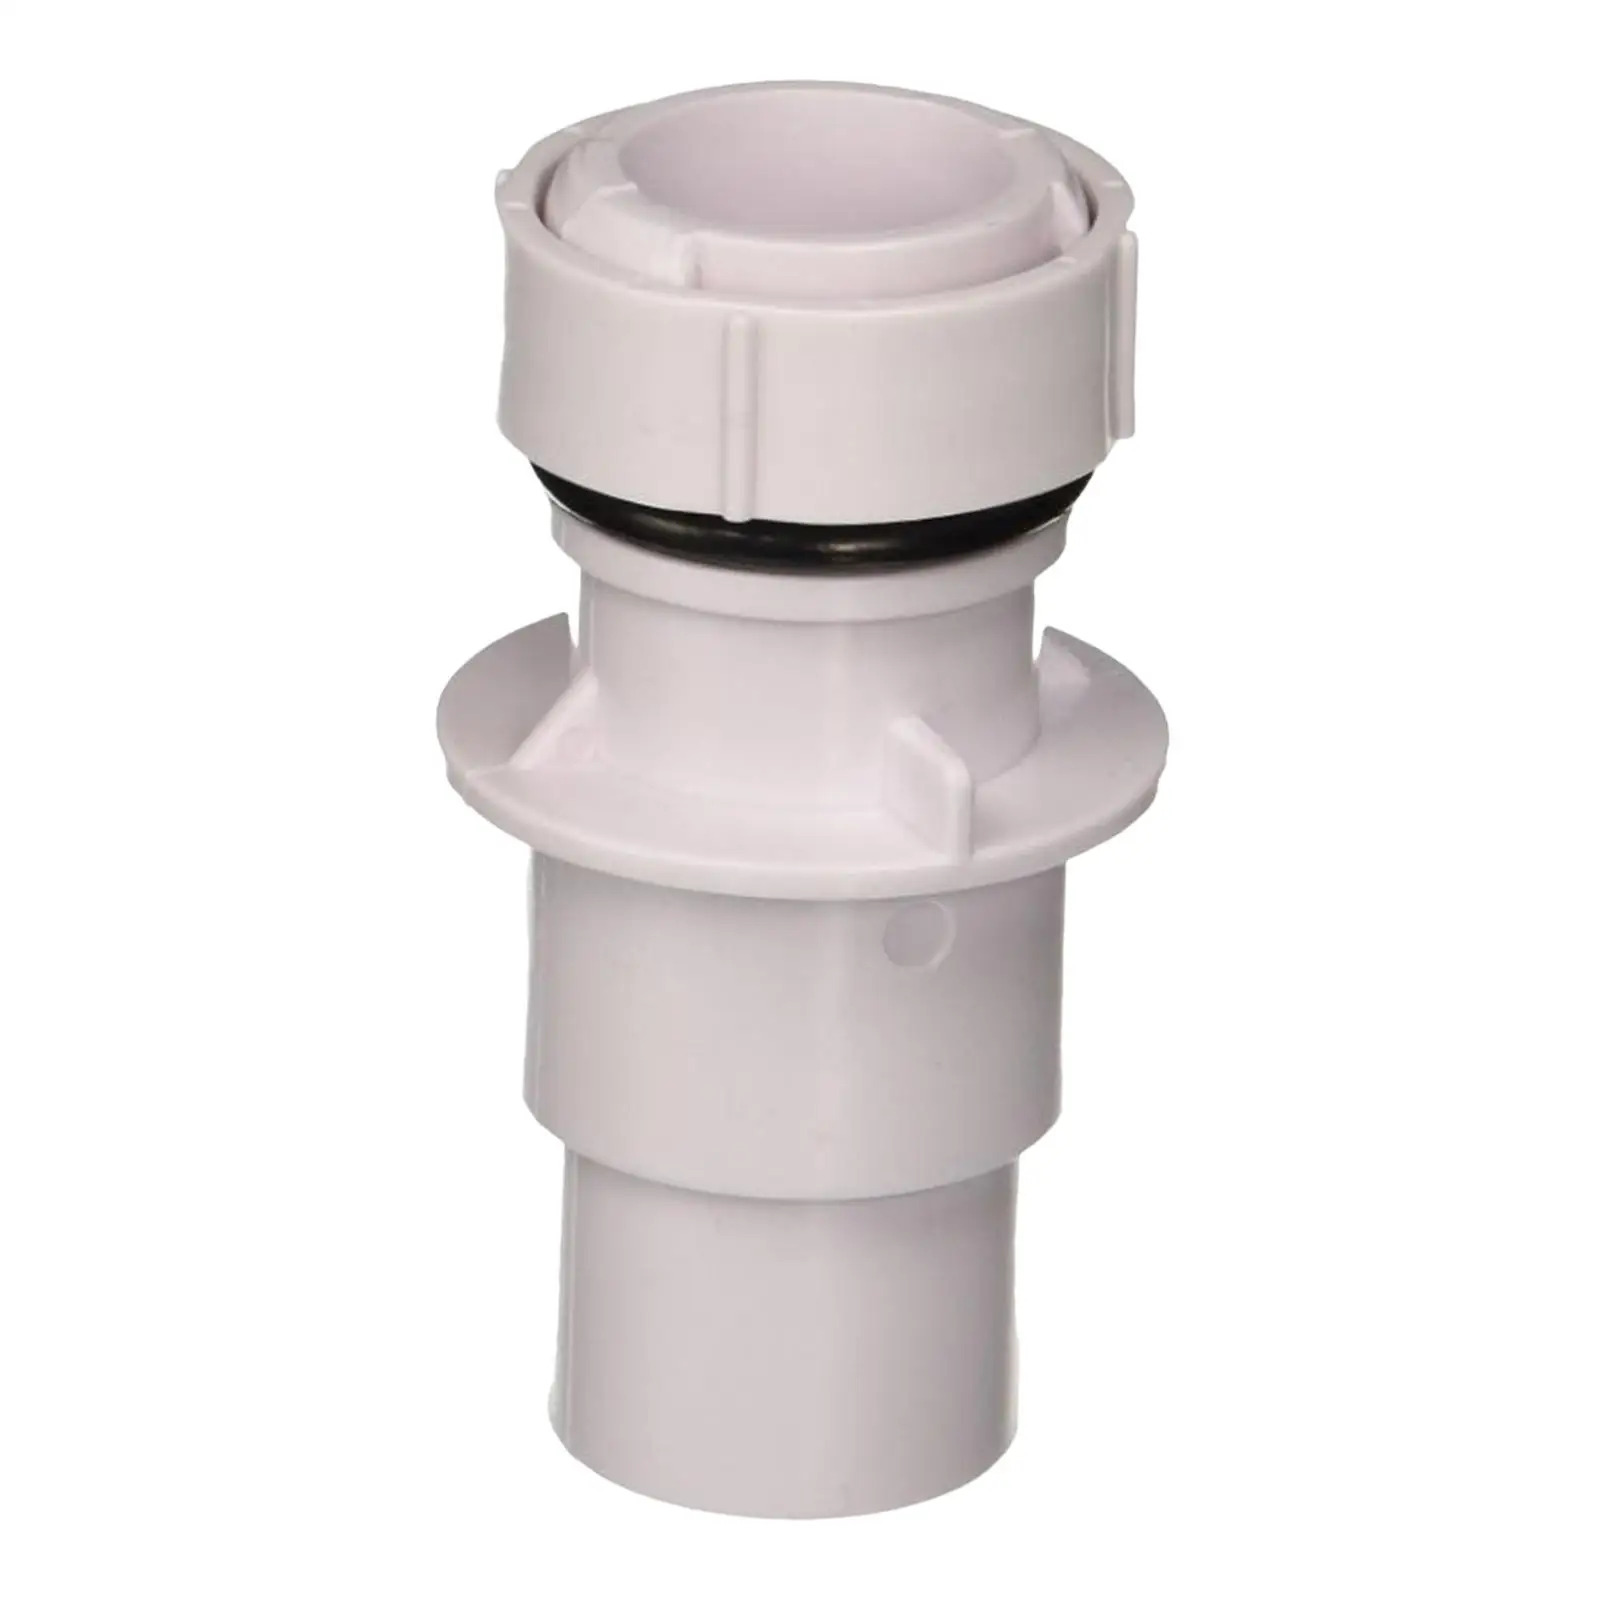 4552 Skim Filter Pump Adapter Durable Pool Cleaning Fittings for Skimmer Plumbing Connection above Ground Pool Pump Supplies